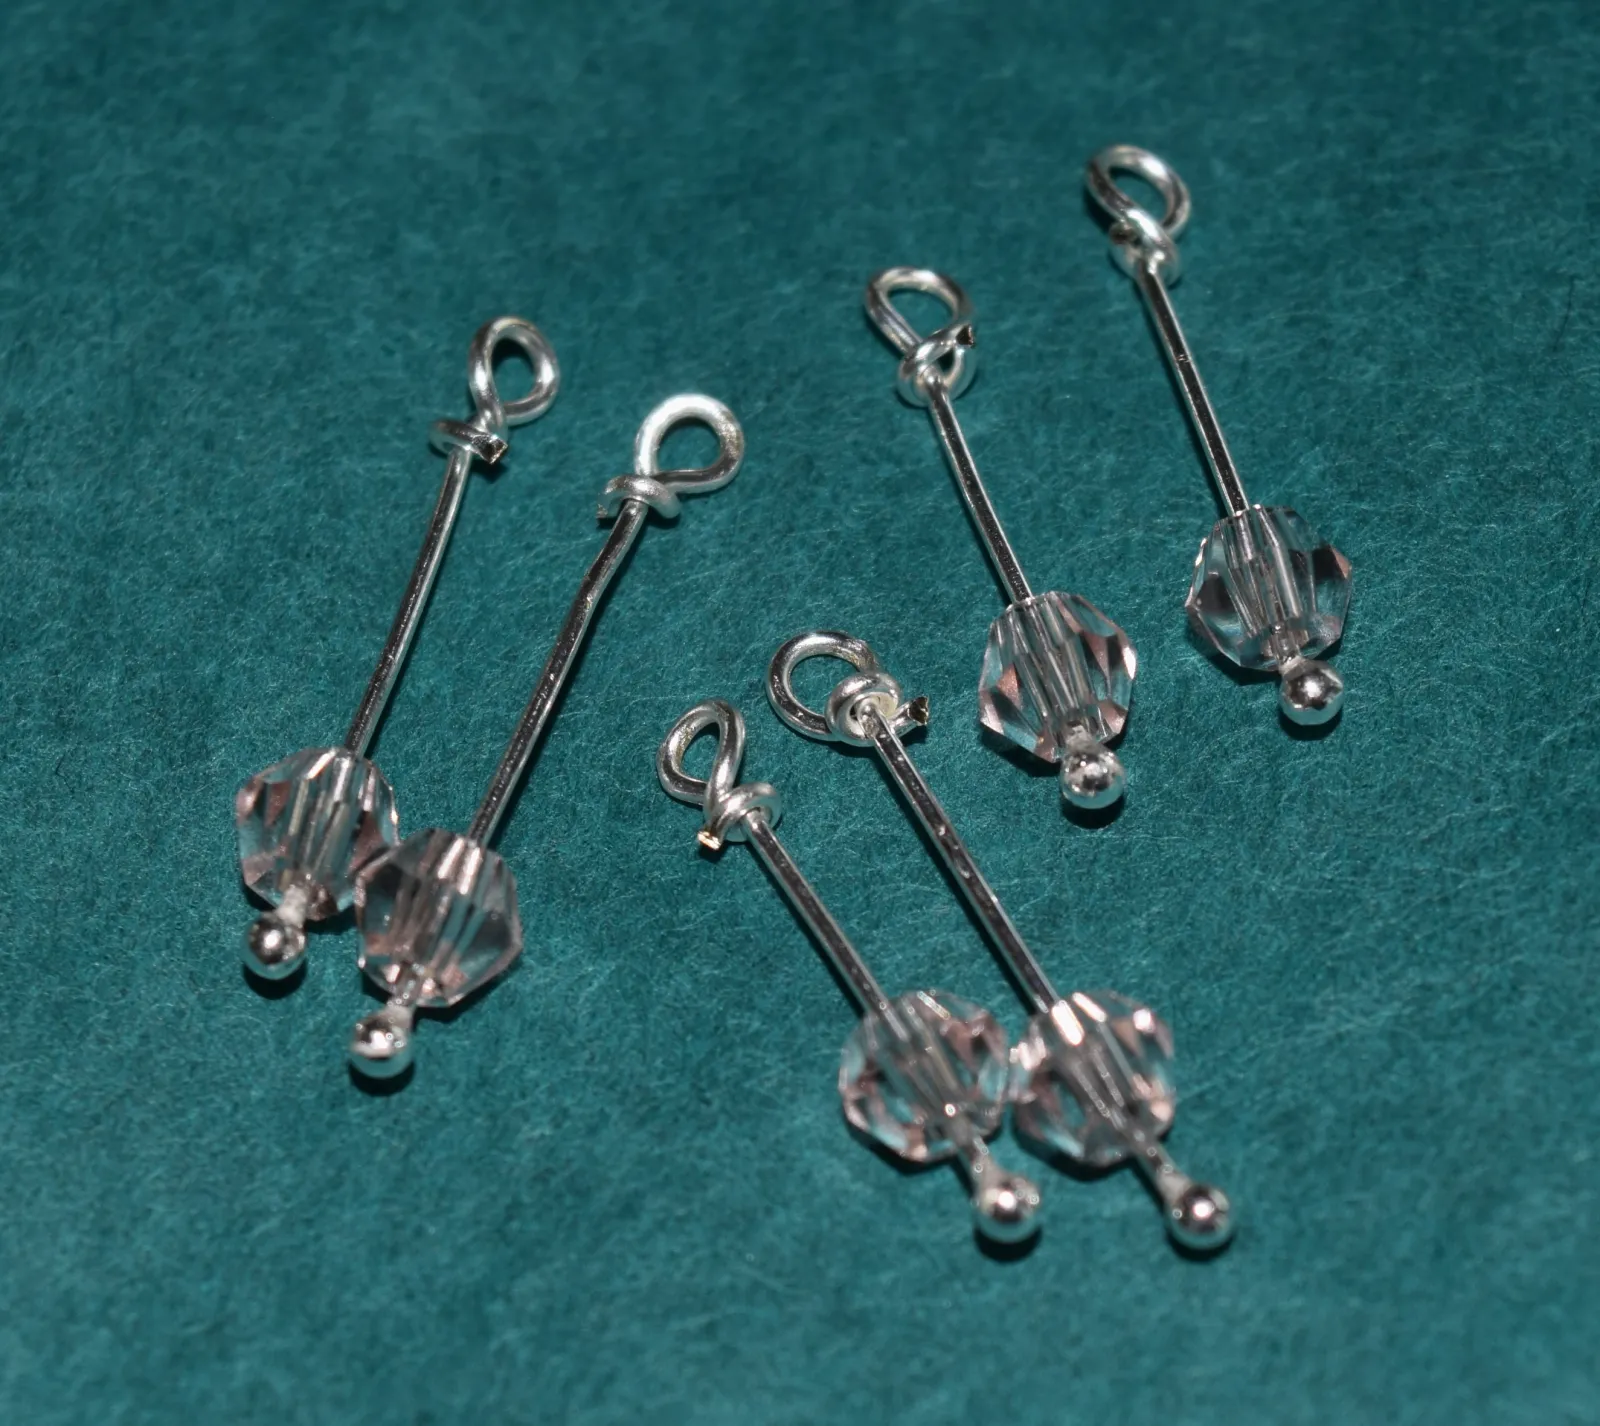 Creating the stamen dangles for Floral Earrings